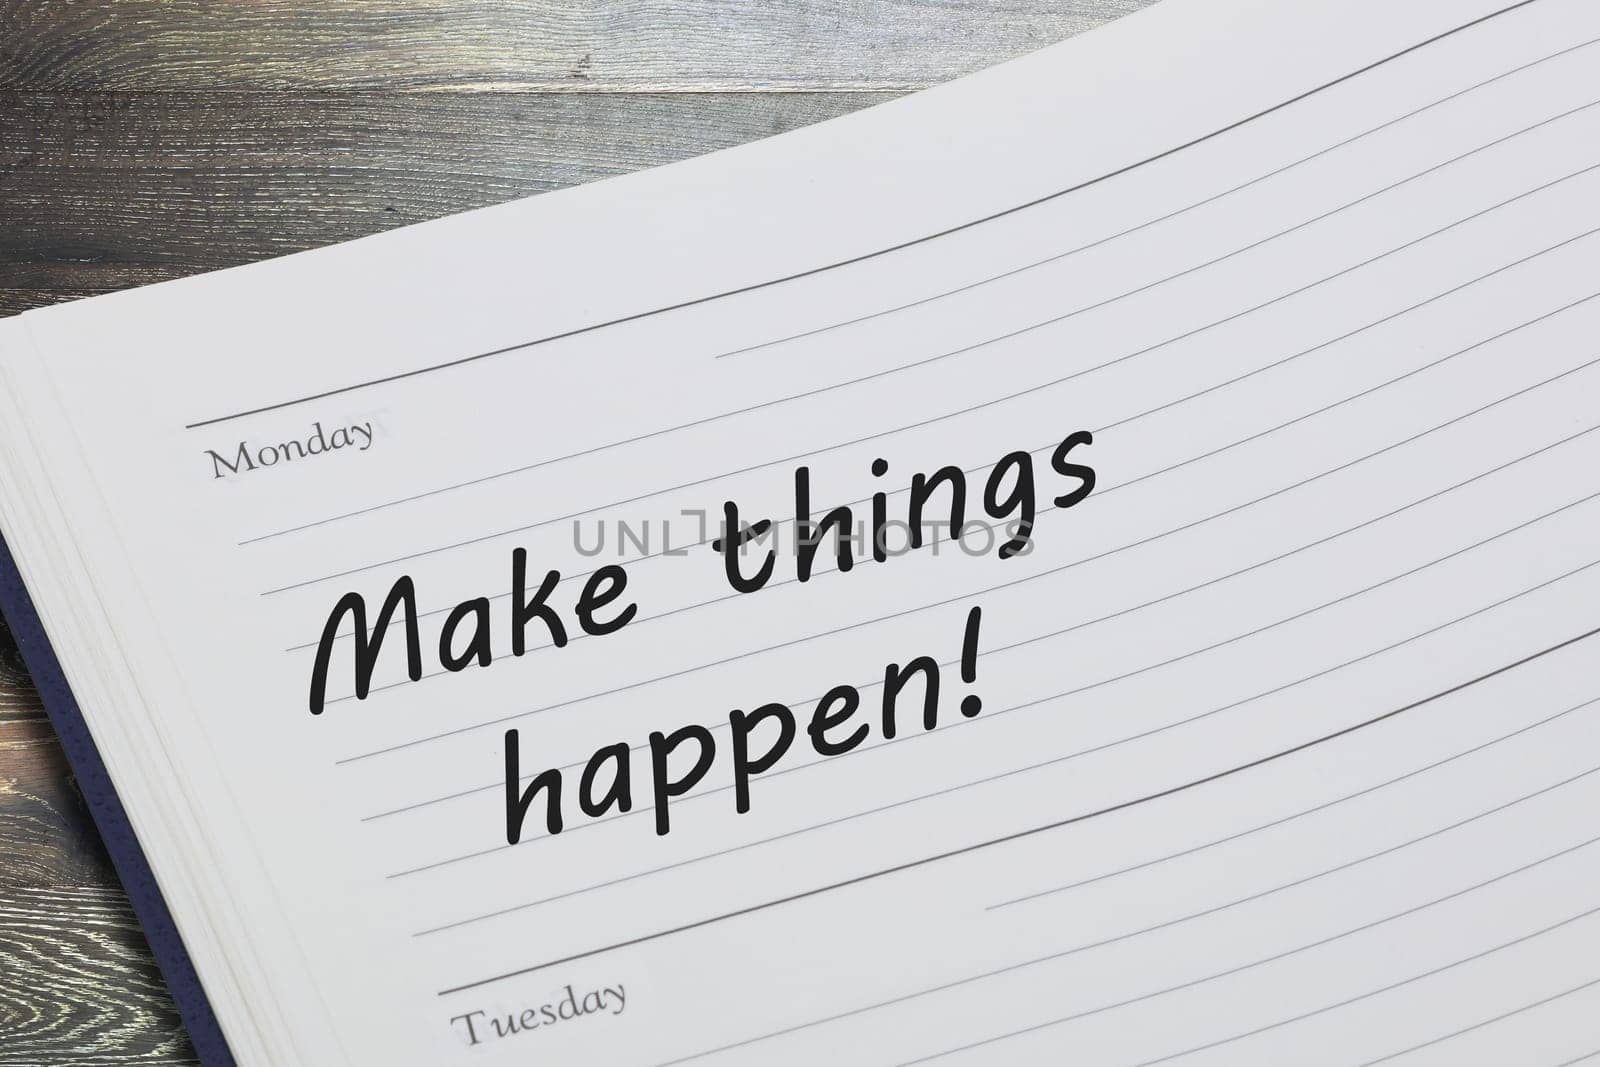 Make things happen reminder message by VivacityImages